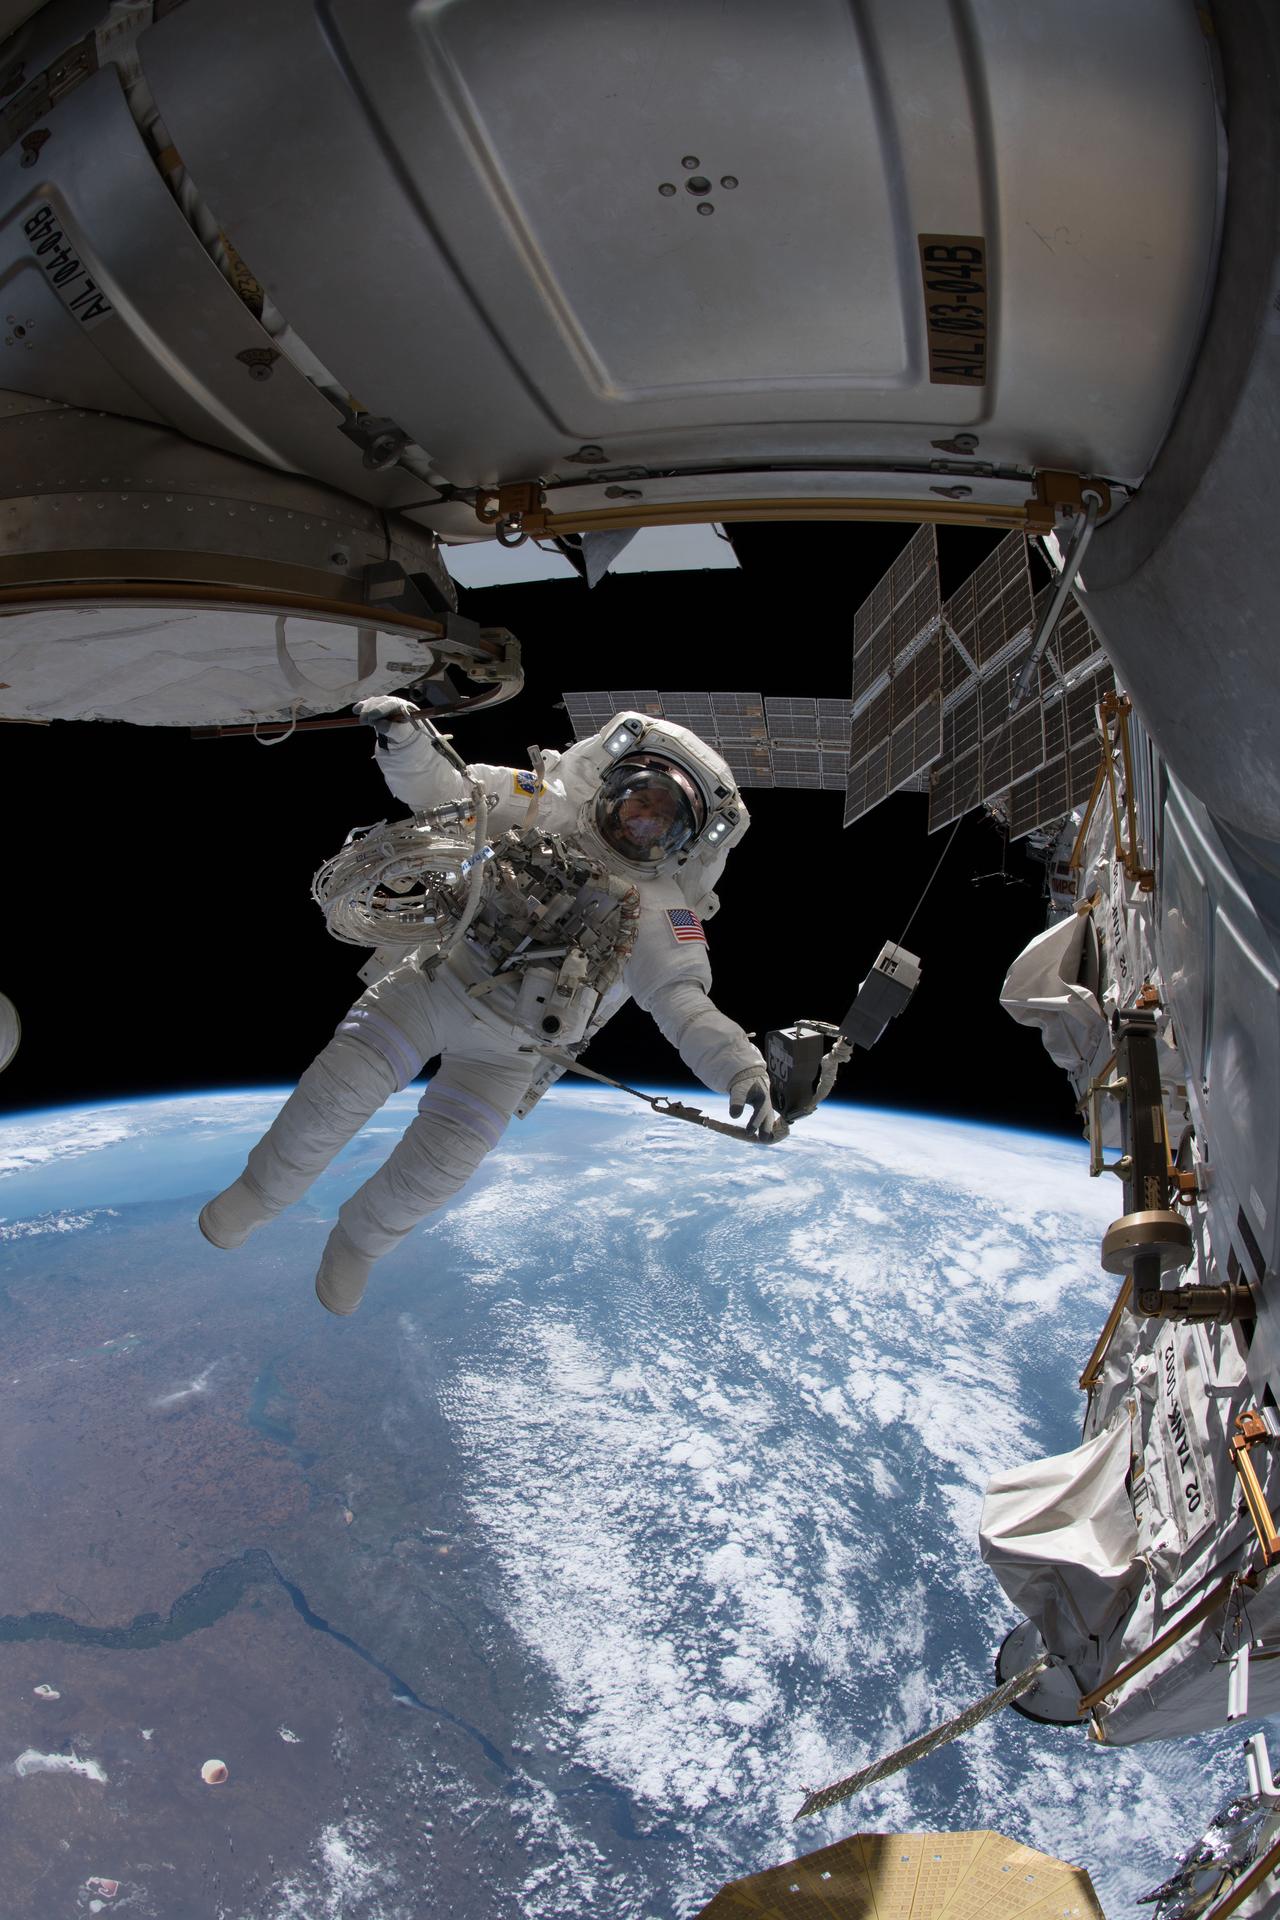 NASA astronaut Drew Feustel is pictured tethered to the International Space Station during a spacewalk.